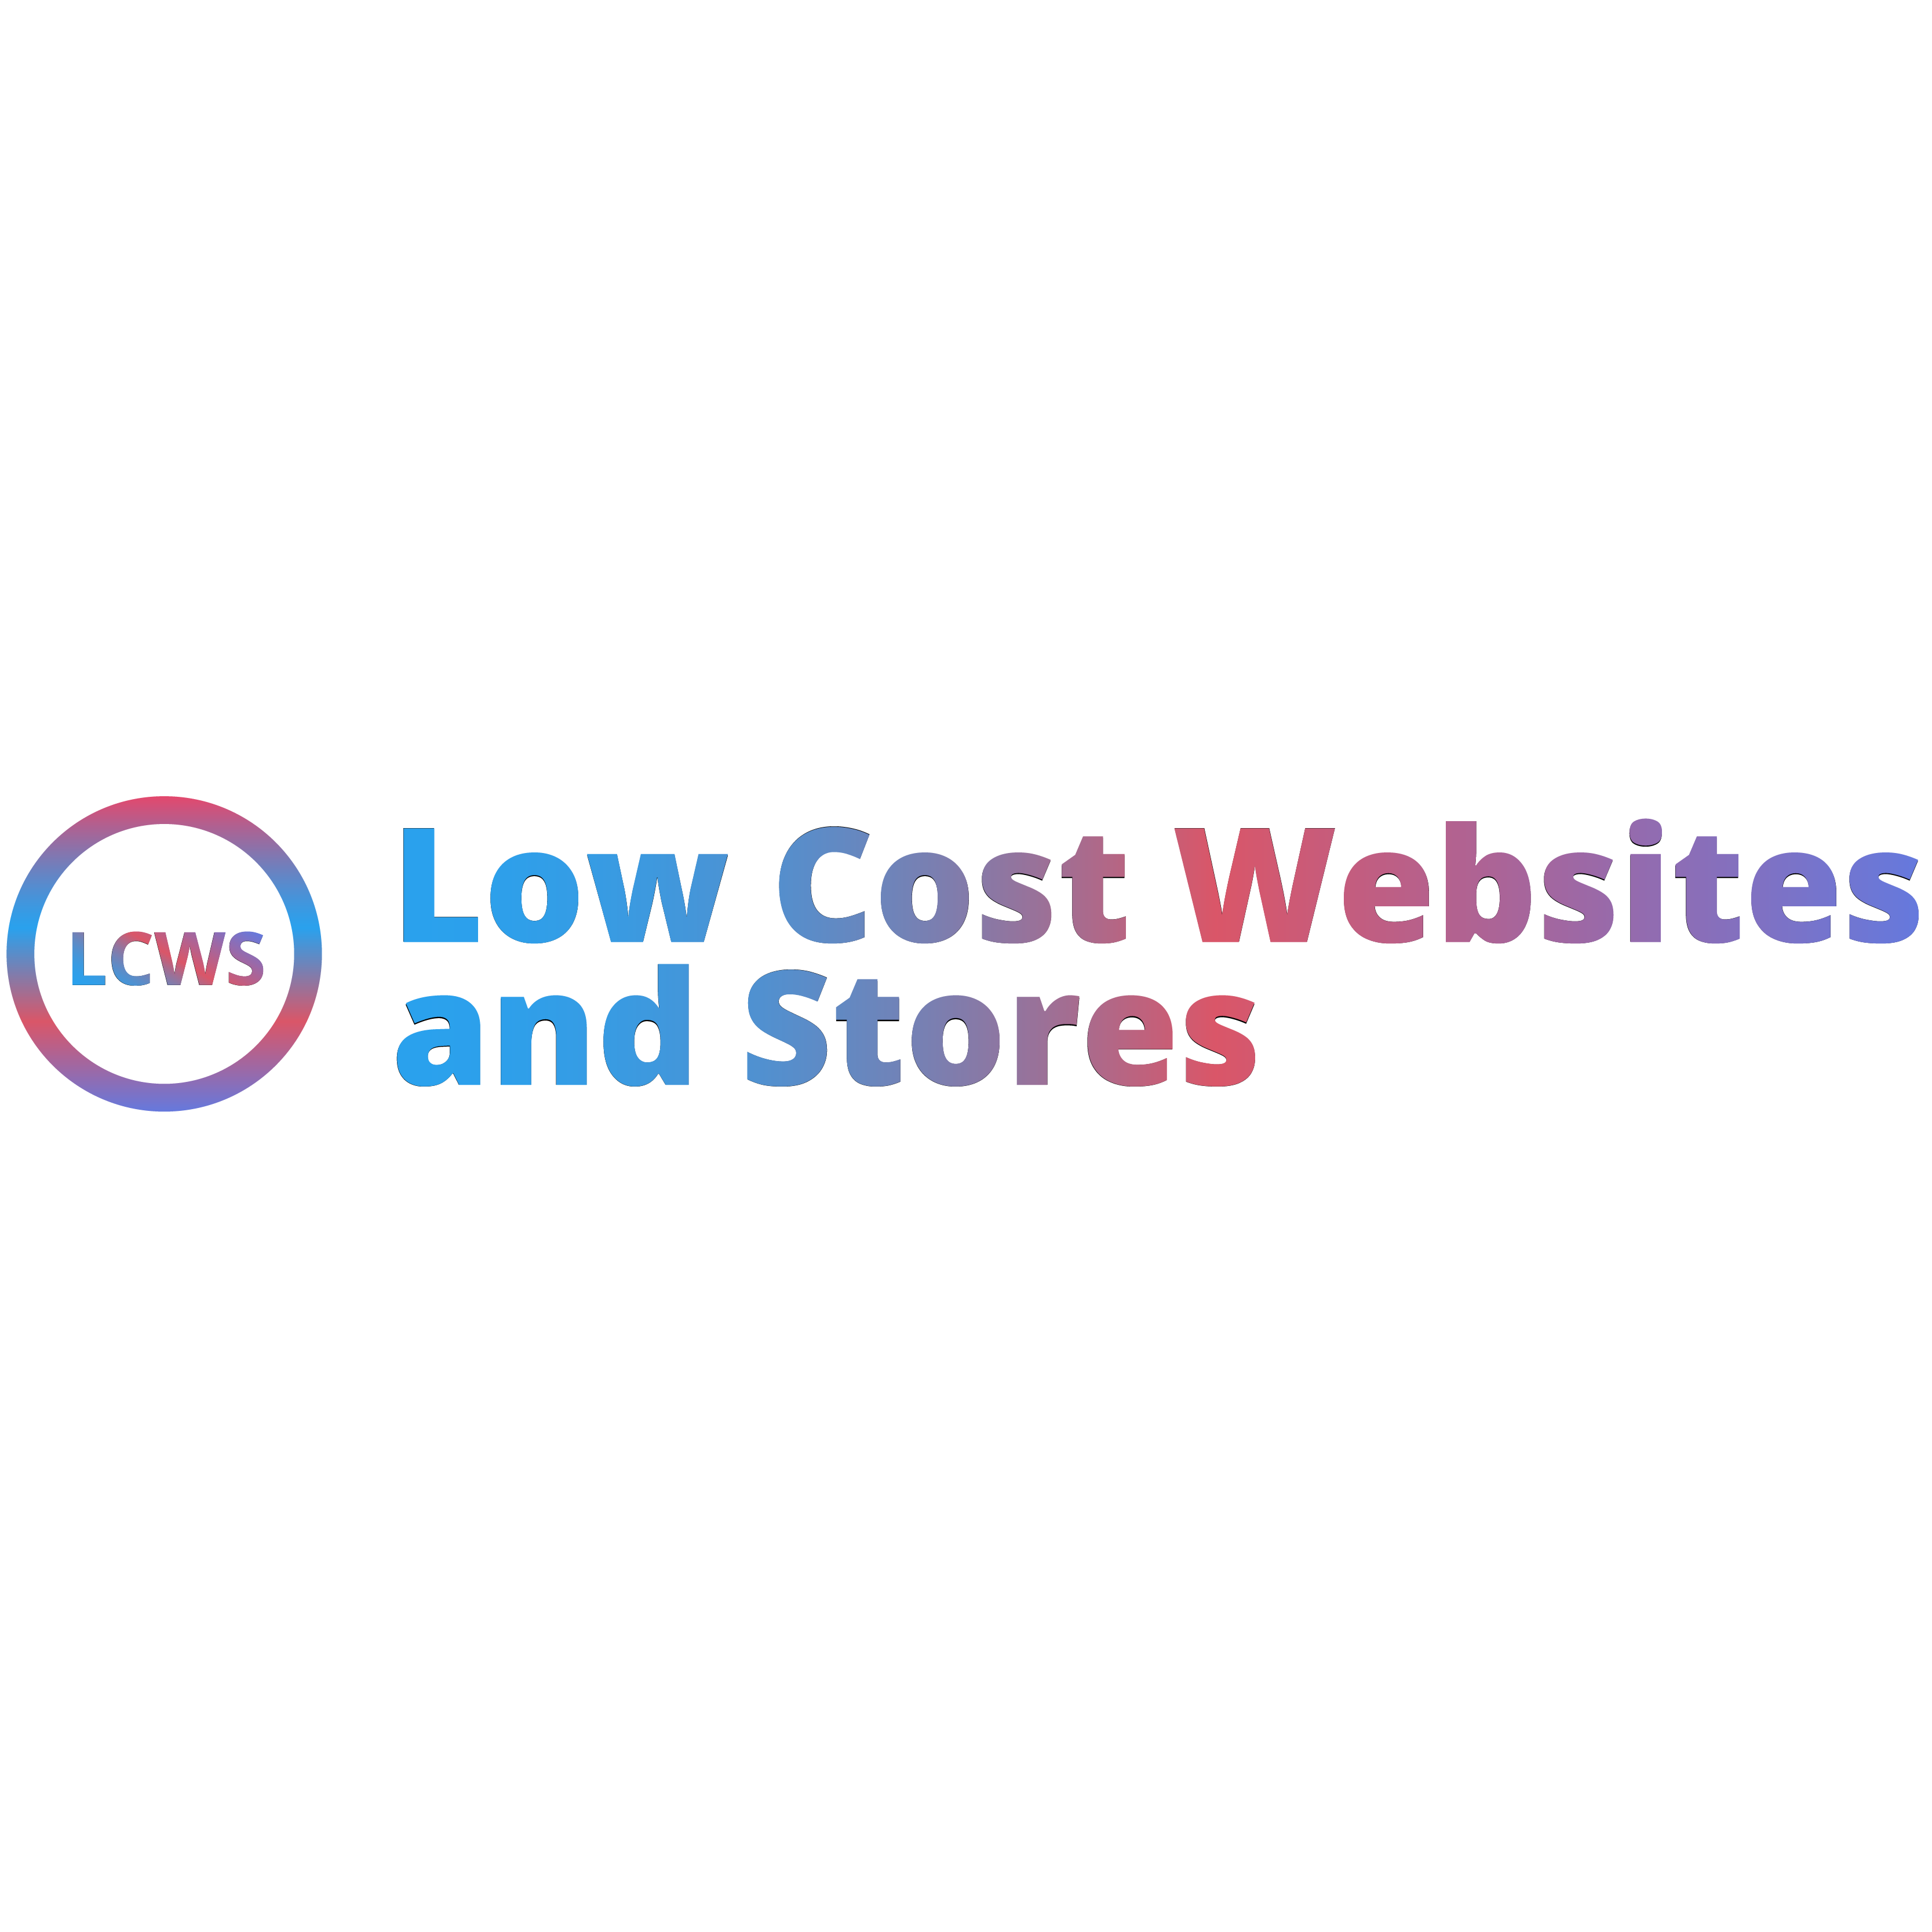 Low Cost Websites and Stores